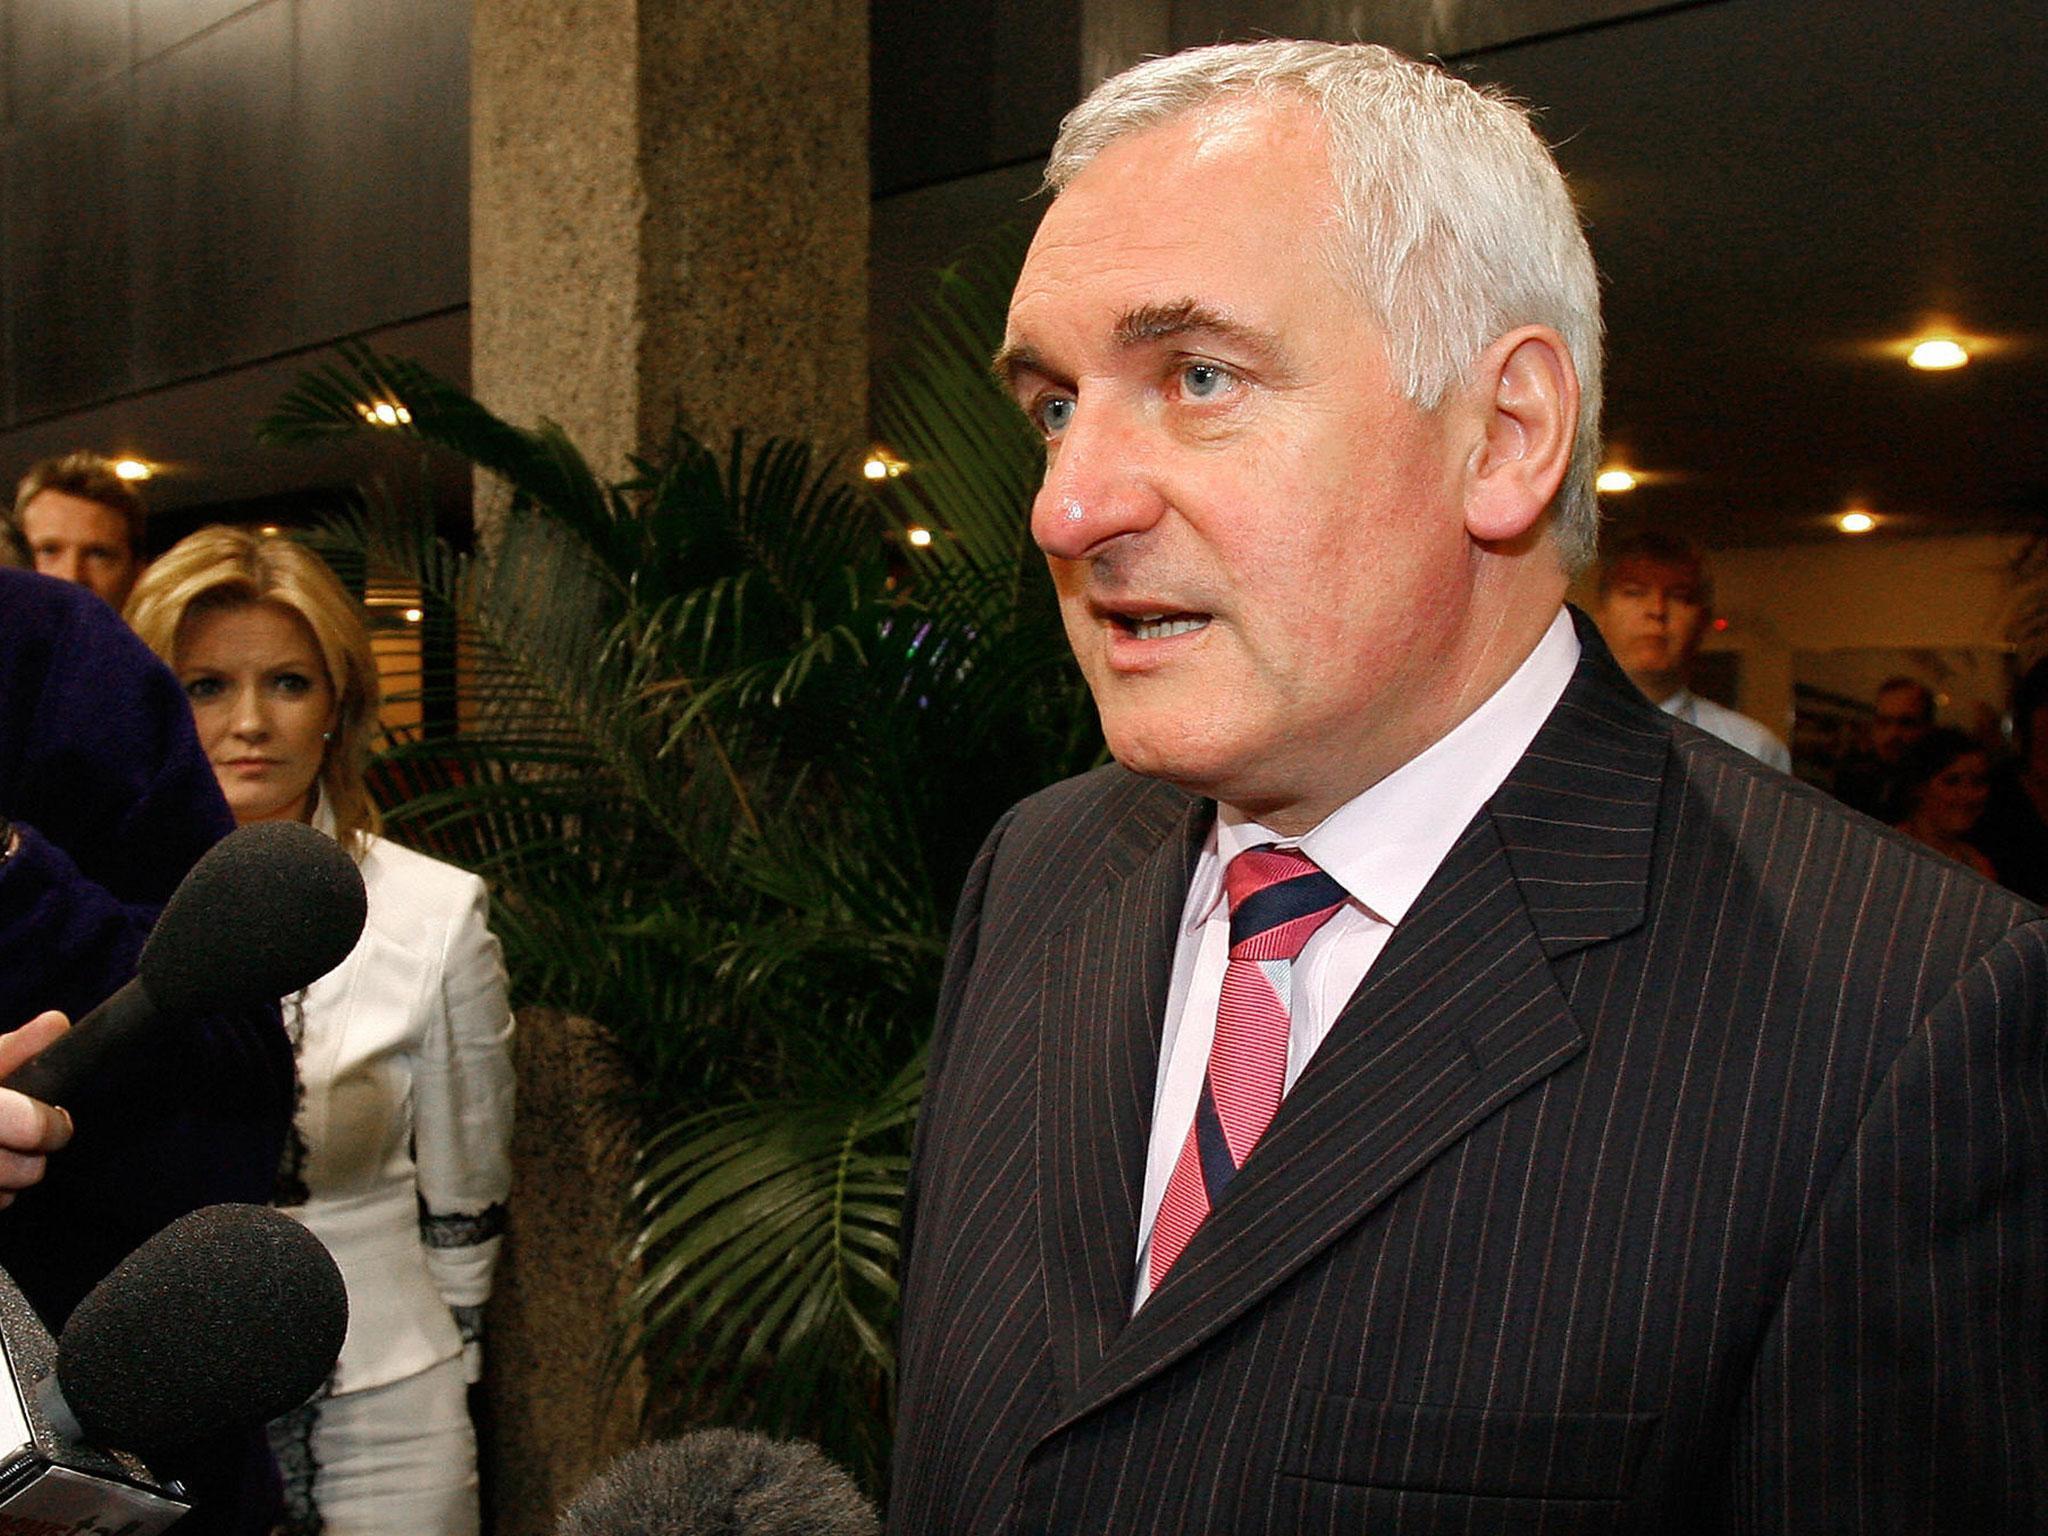 The former taoiseach said reinstating a physical barrier would have ‘a destabilising effect’